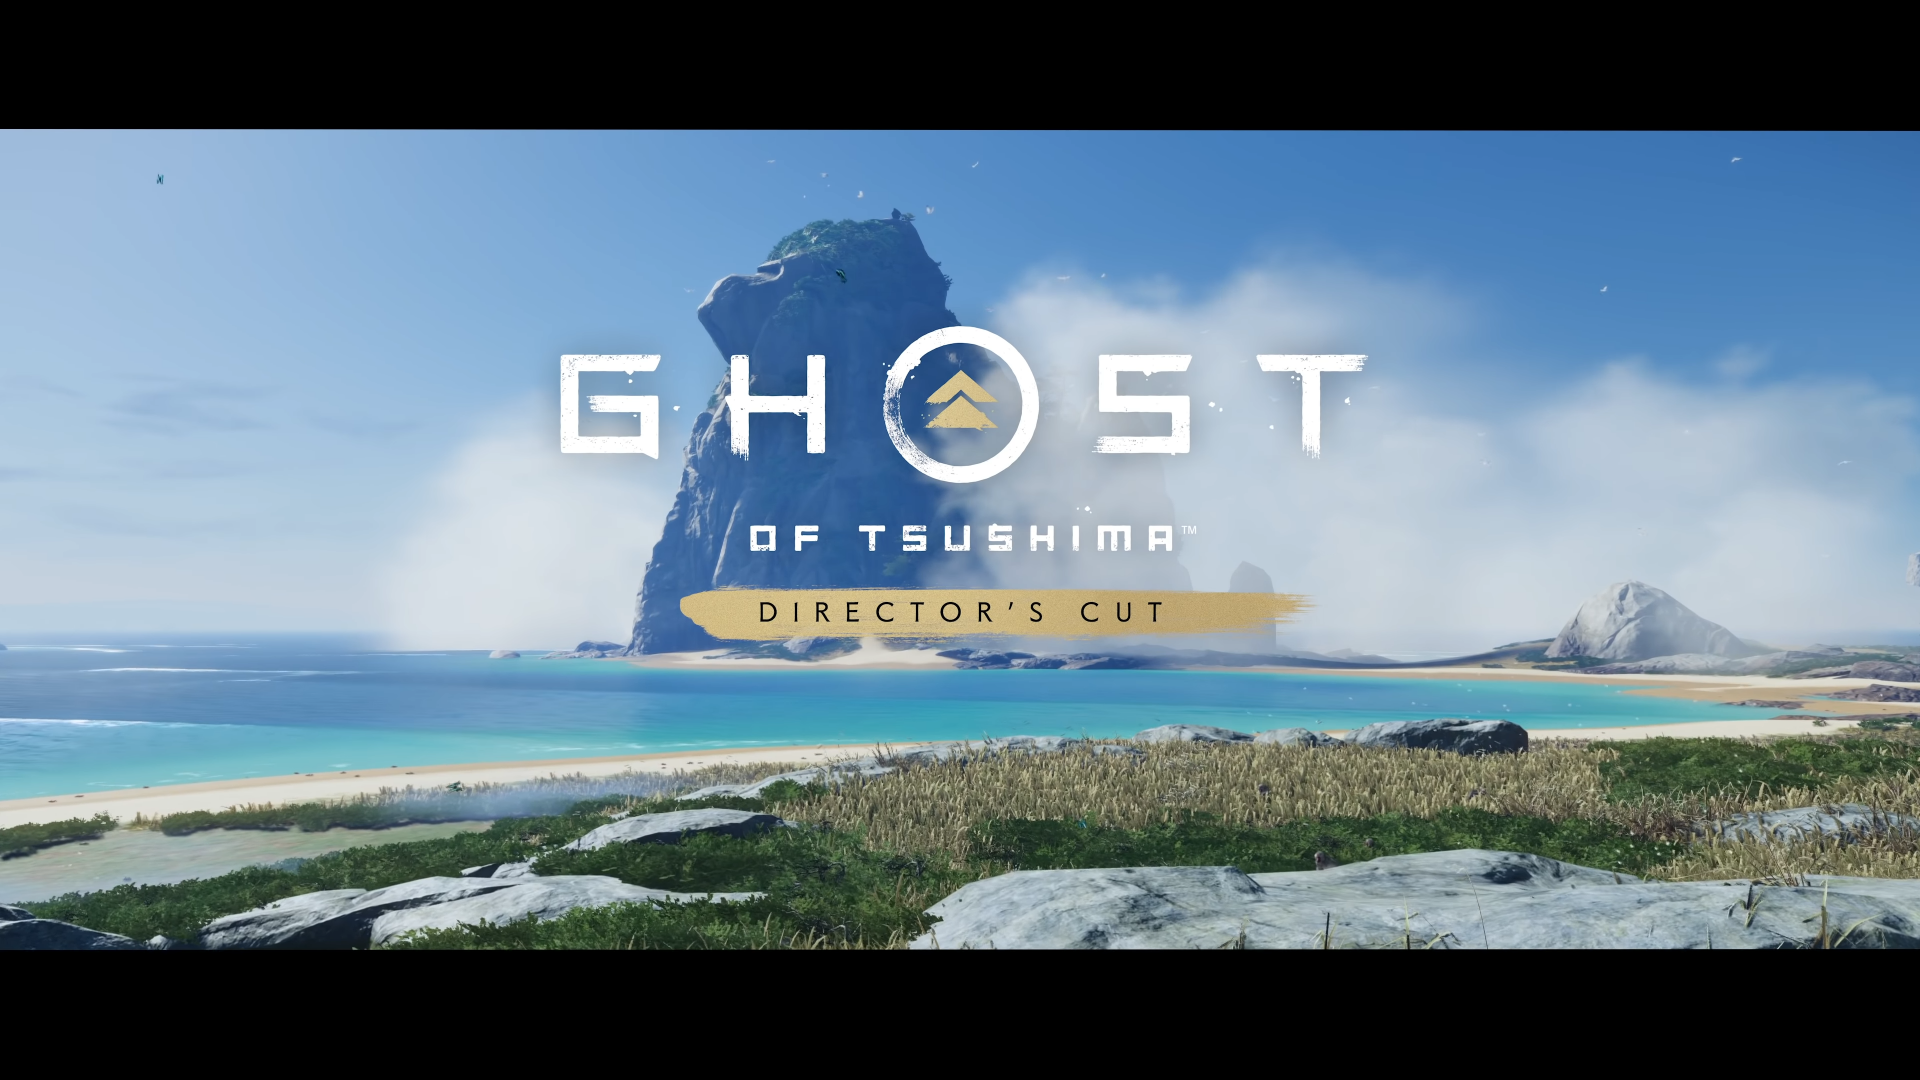 Ghost of Tsushima Director's Cut Game Review + Iki Island DLC for PS5